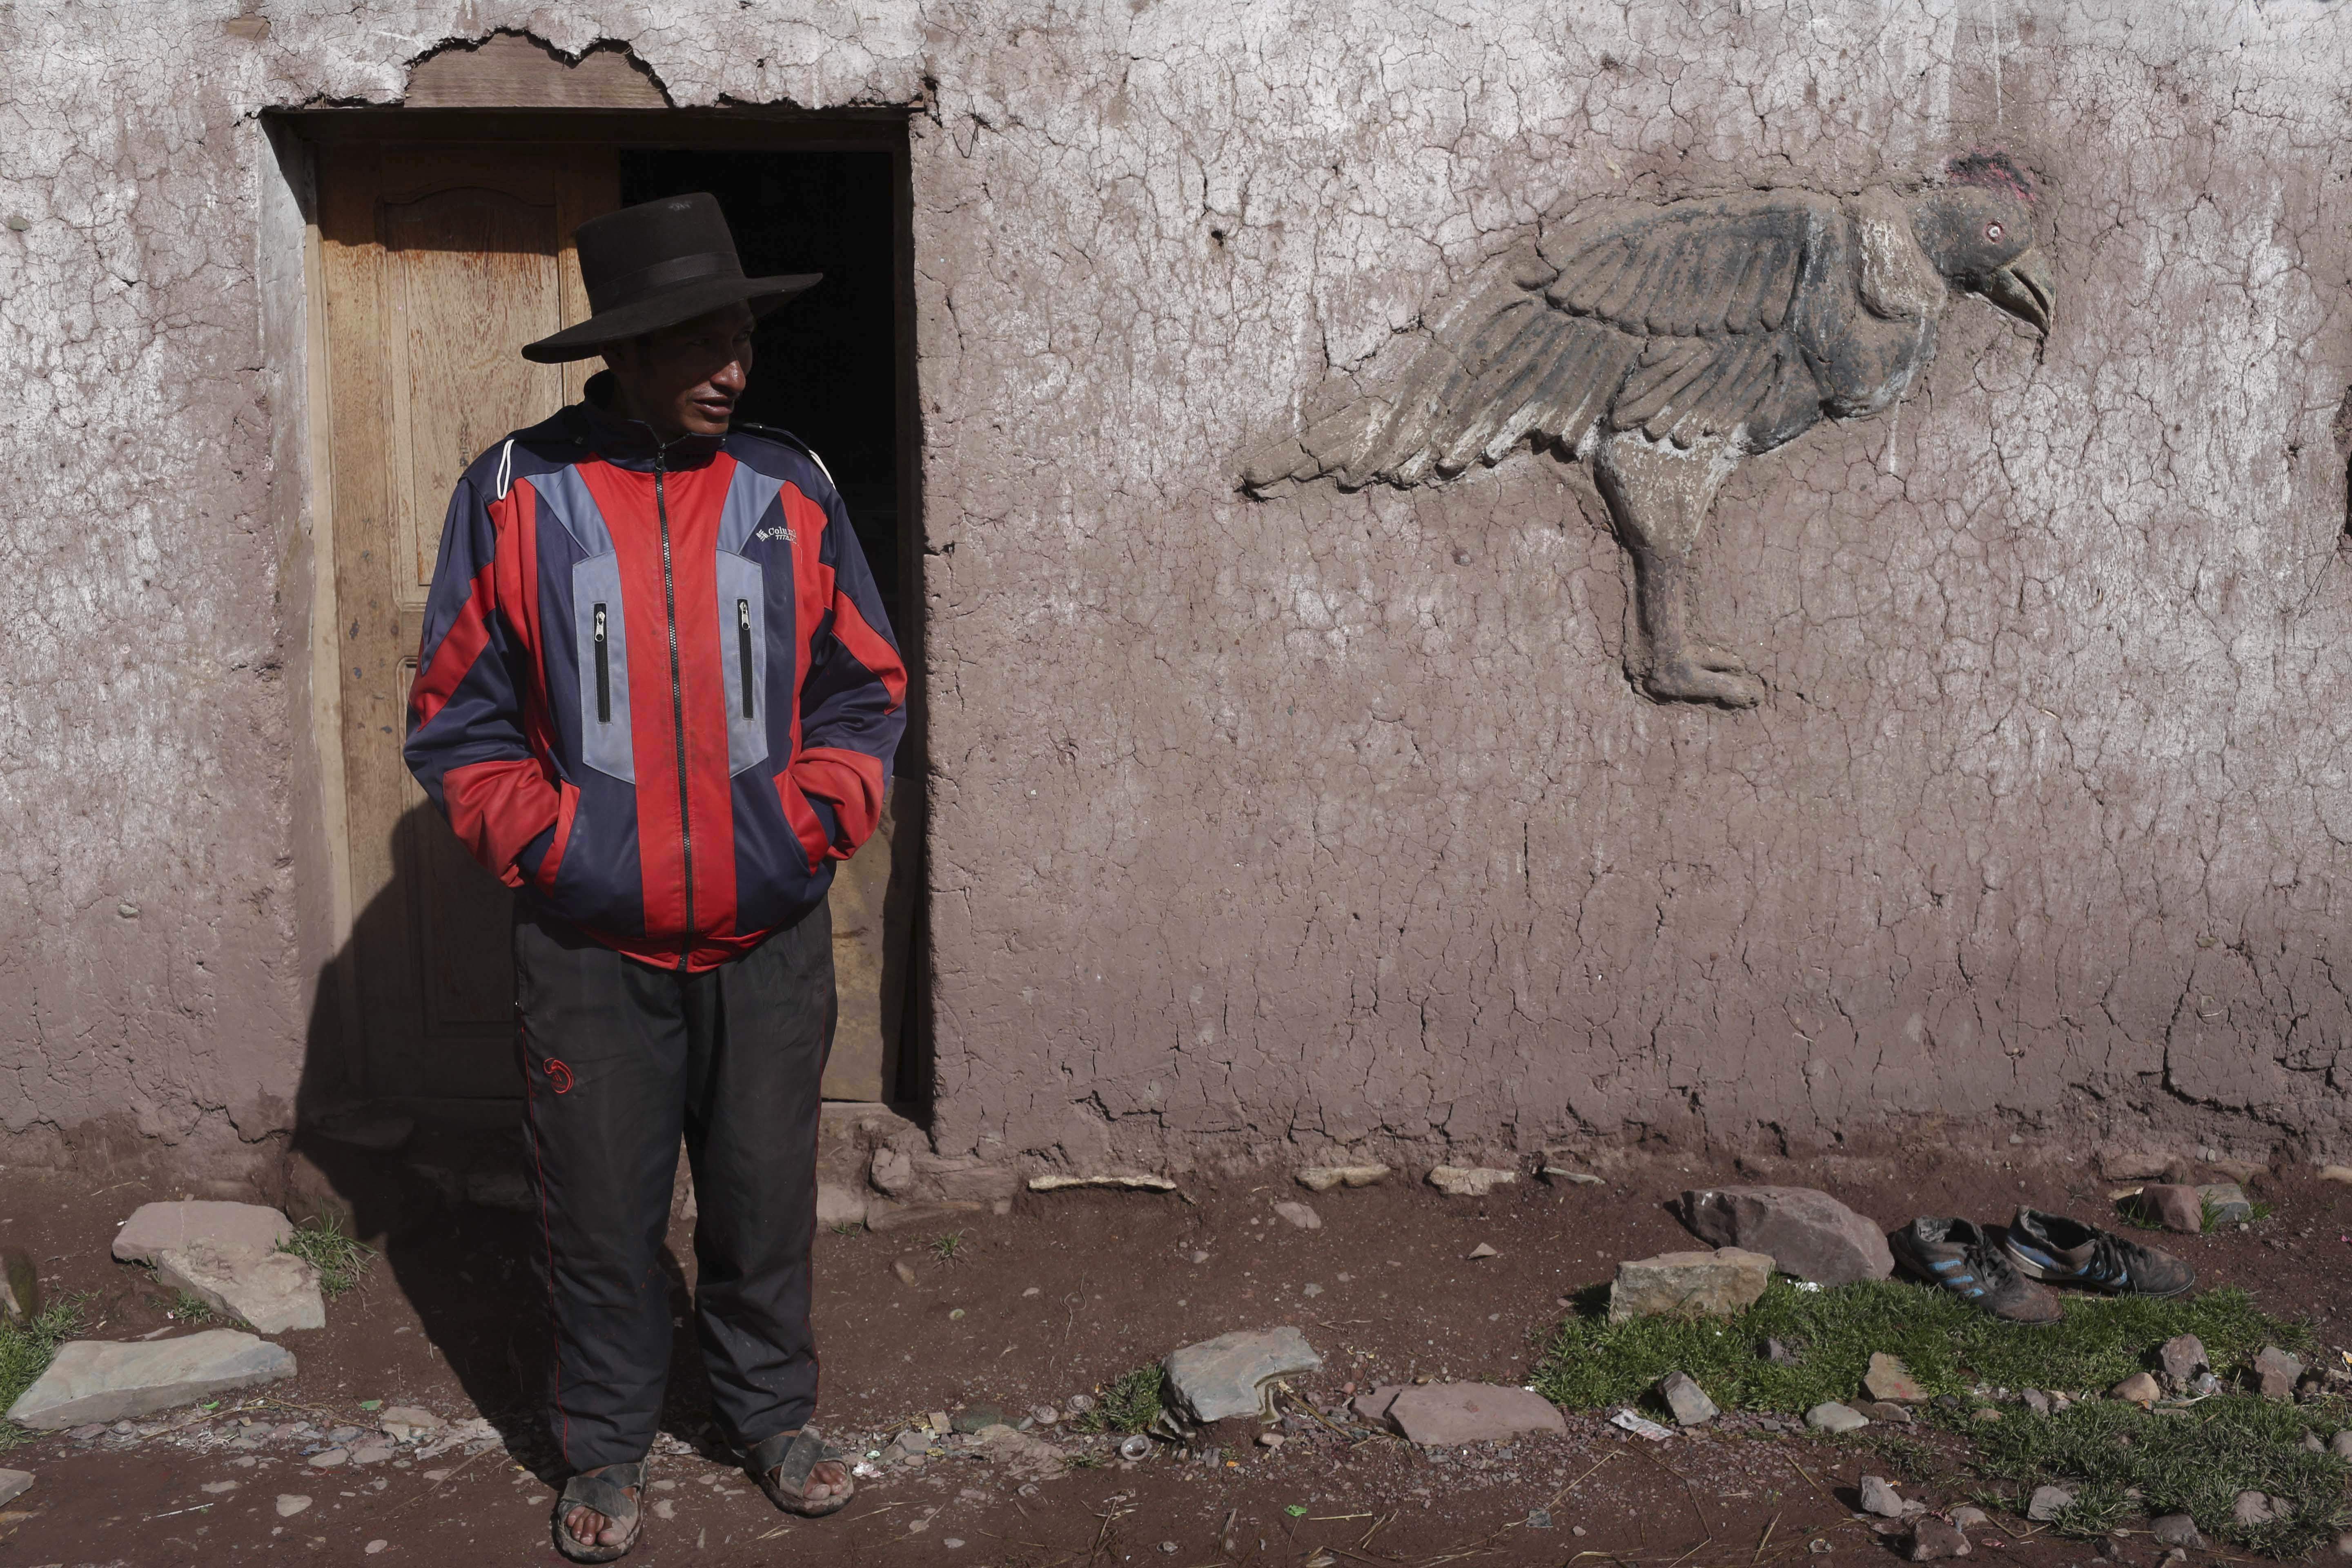 In this March 2, 2018 photo, Miguel Rocco stands in front of his home in Pitumarca, Peru. The local indigenous community has struggled with high rates of alcoholism, malnutrition and falling prices of wool from their prized alpaca. (AP Photo/Martin Mejia)